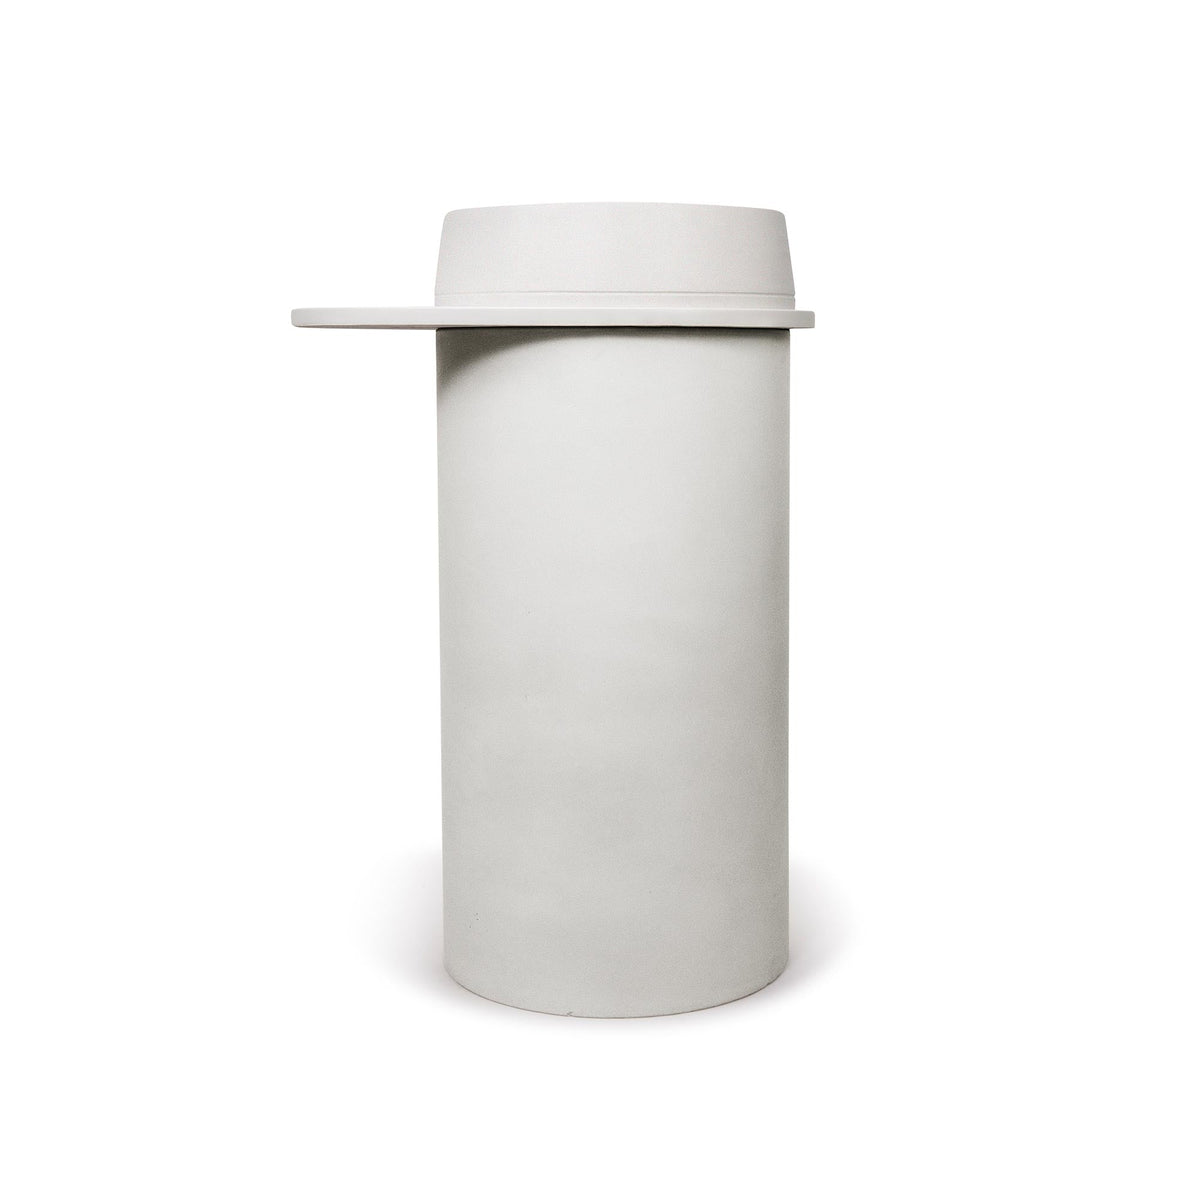 Cylinder with Tray - Funl Basin (Charcoal,Sky Grey)